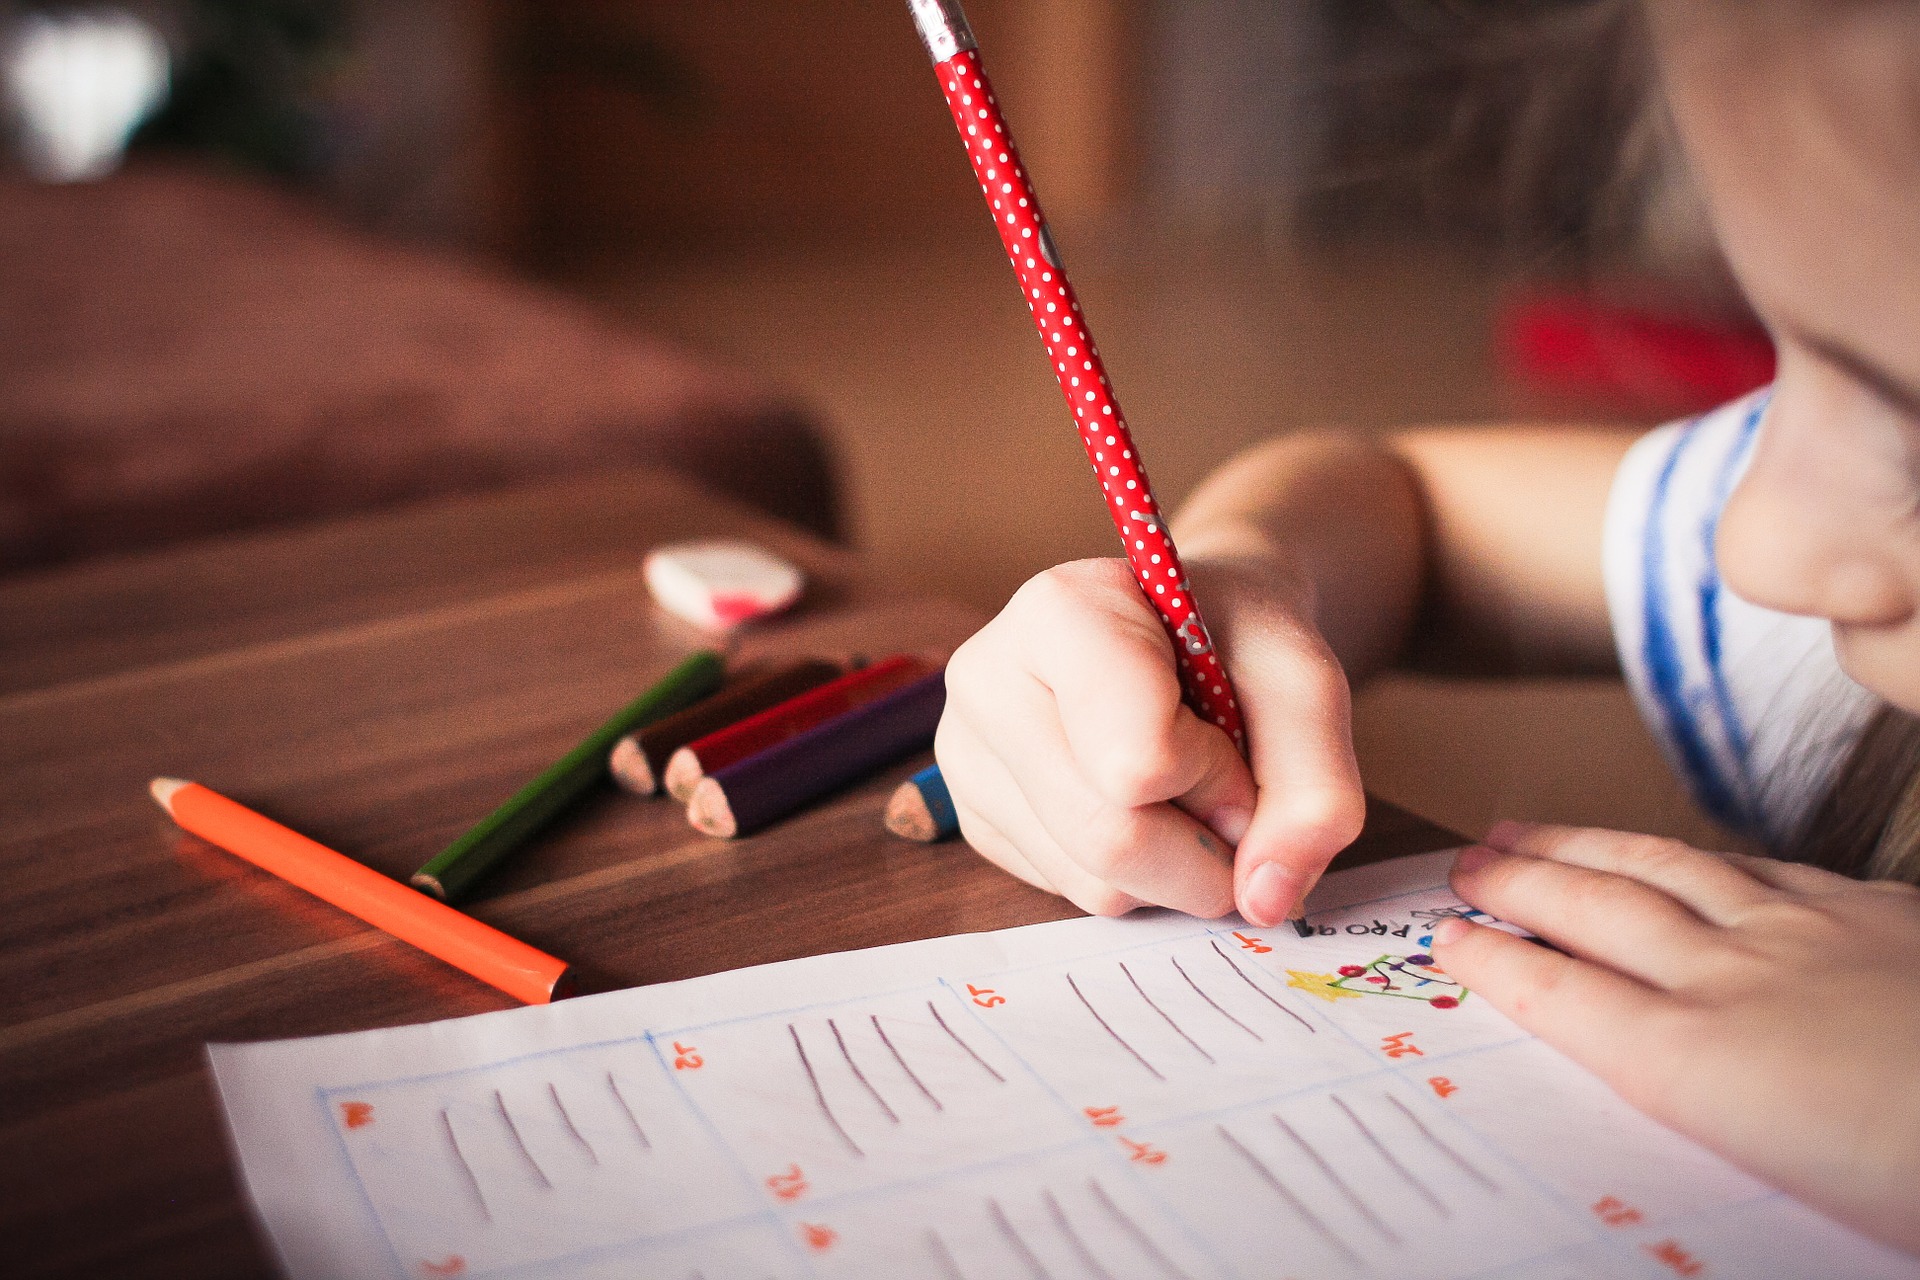 Child doing homework with a red pencil.